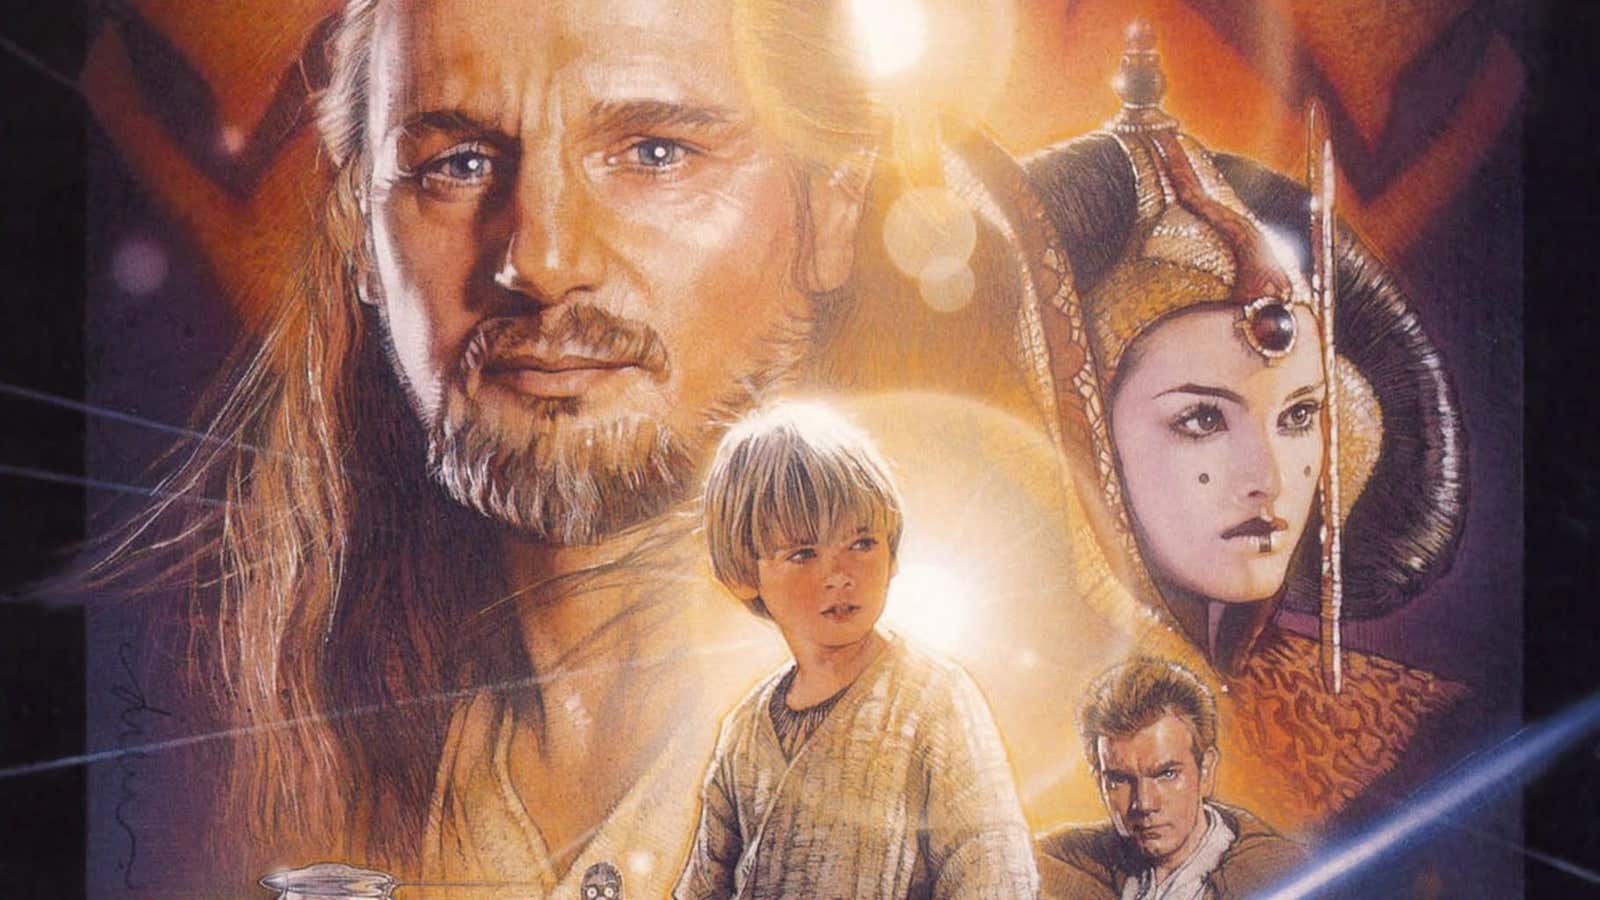 A crop of Drew Struzan’s theatrical poster for The Phantom Menace.